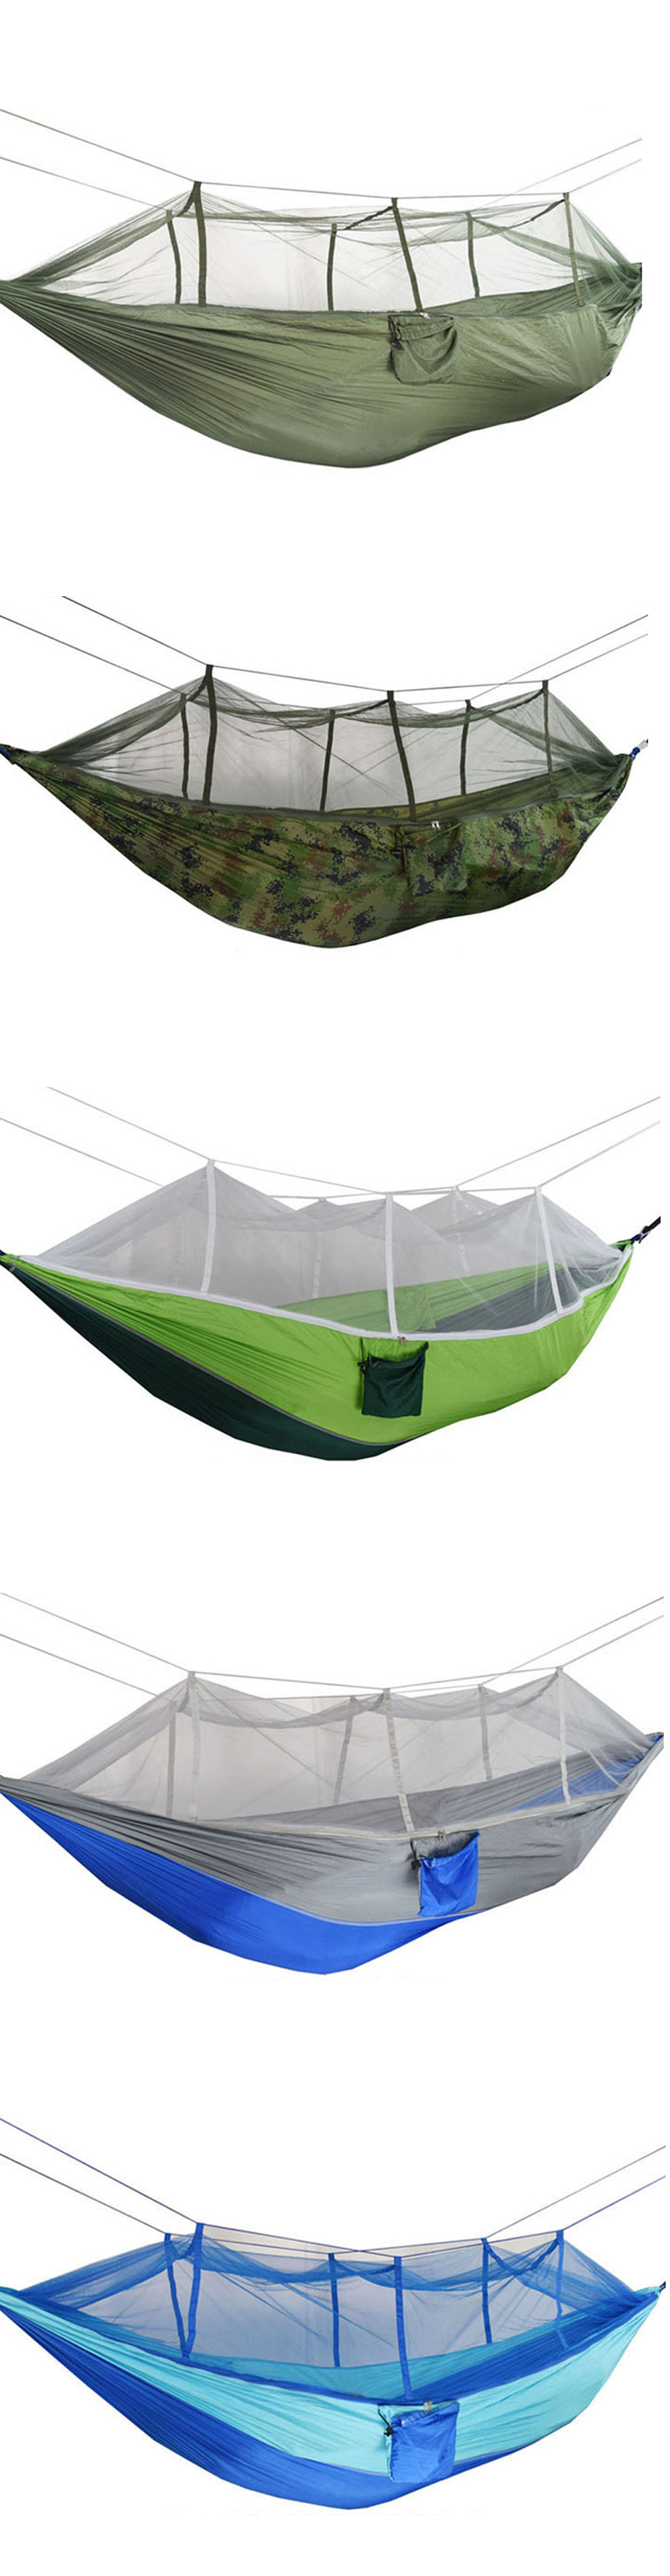 260x140cm-Double-People-Mosquito-Hammock-Camping-Garden-Sleeping-Hanging-Bed-Max-Load-300kg-1674807-4